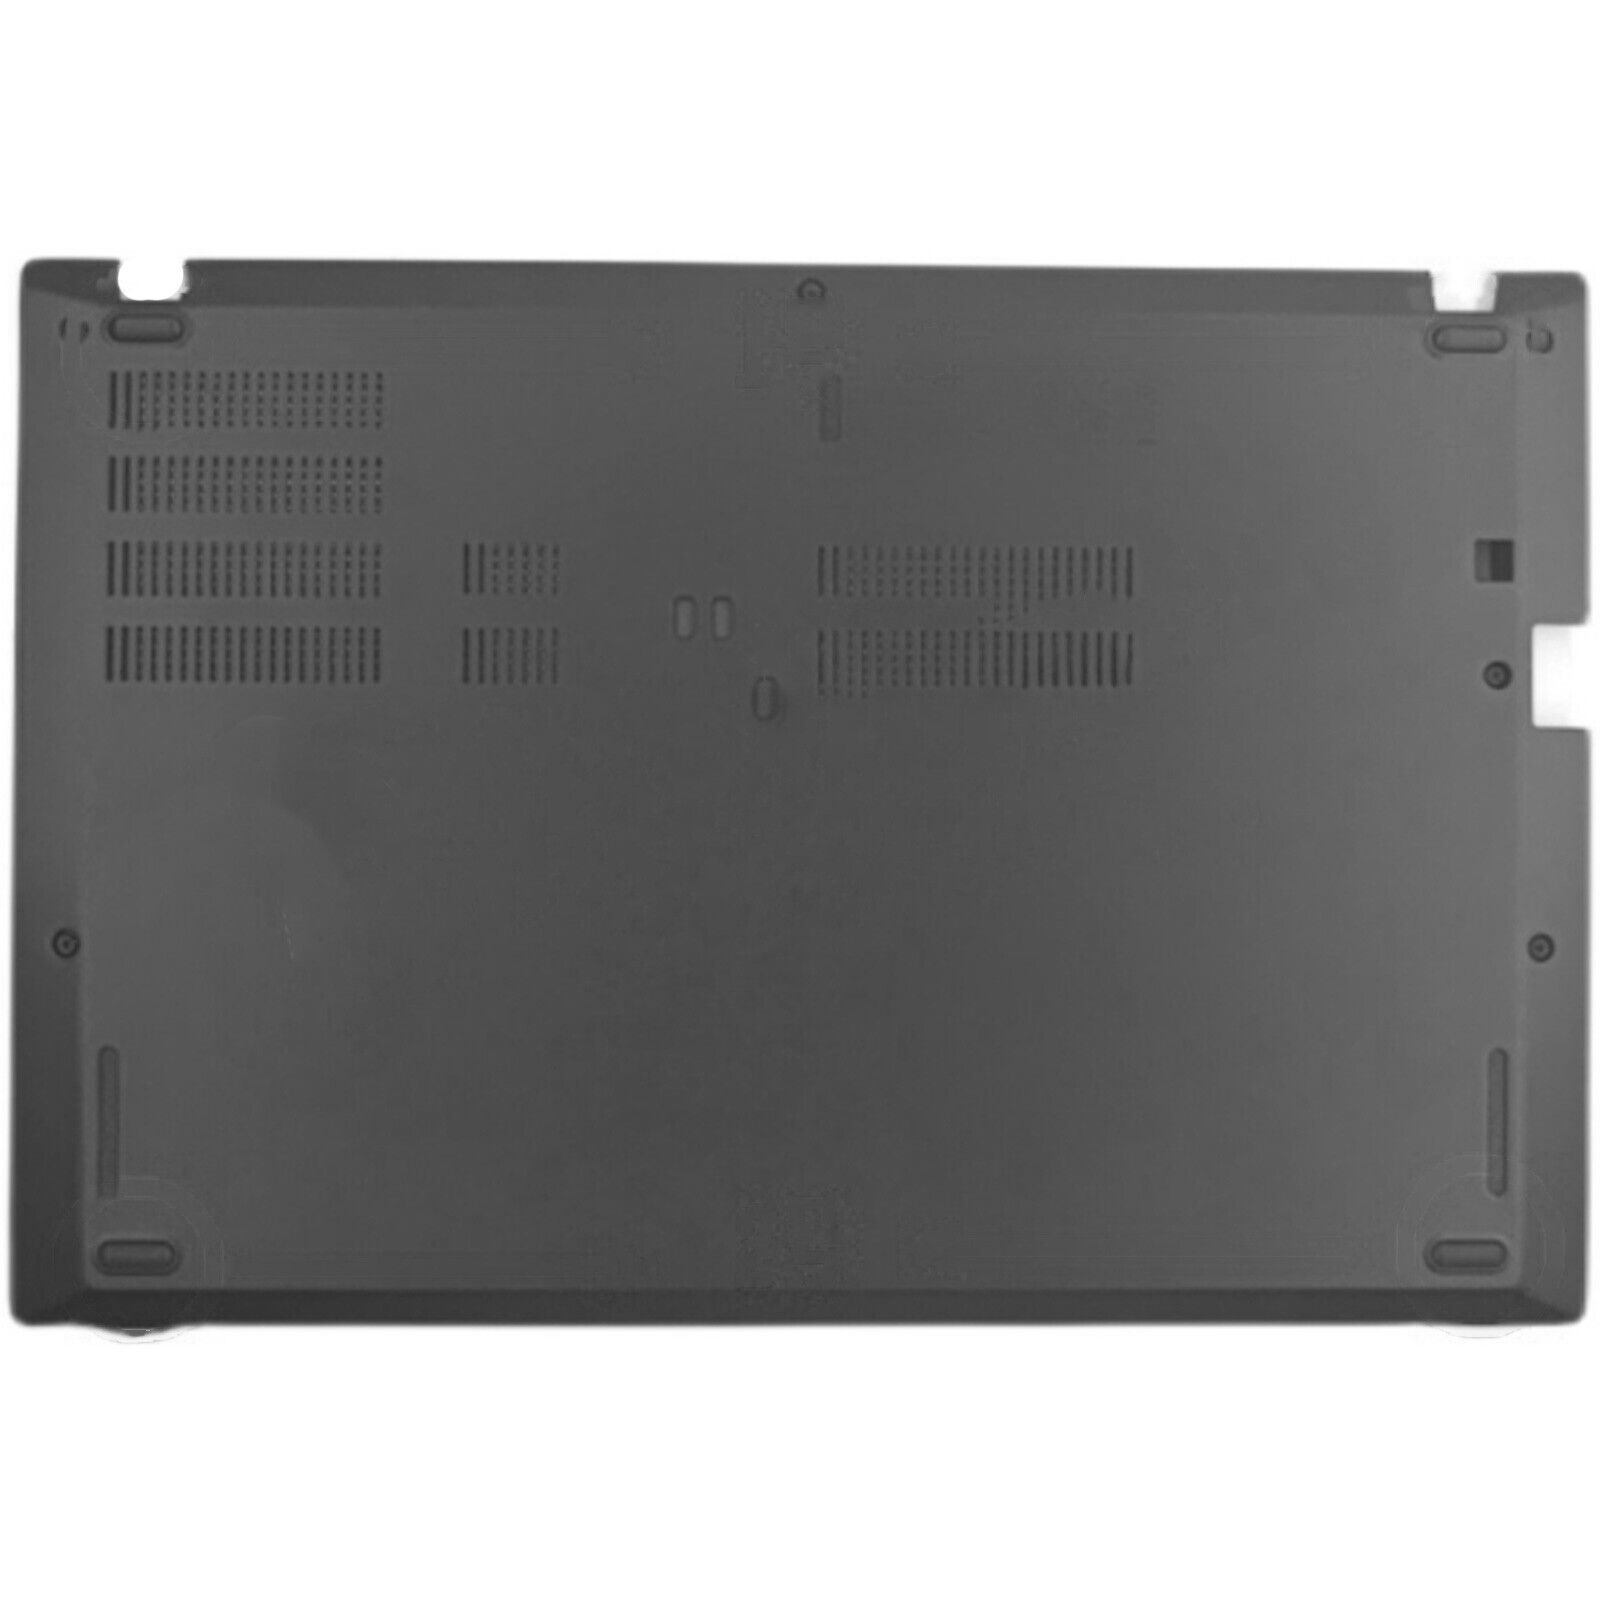 Bottom Case Foot Pad Anti-Slip Pad Rubber Pad Part for Lenovo Think pad T480S